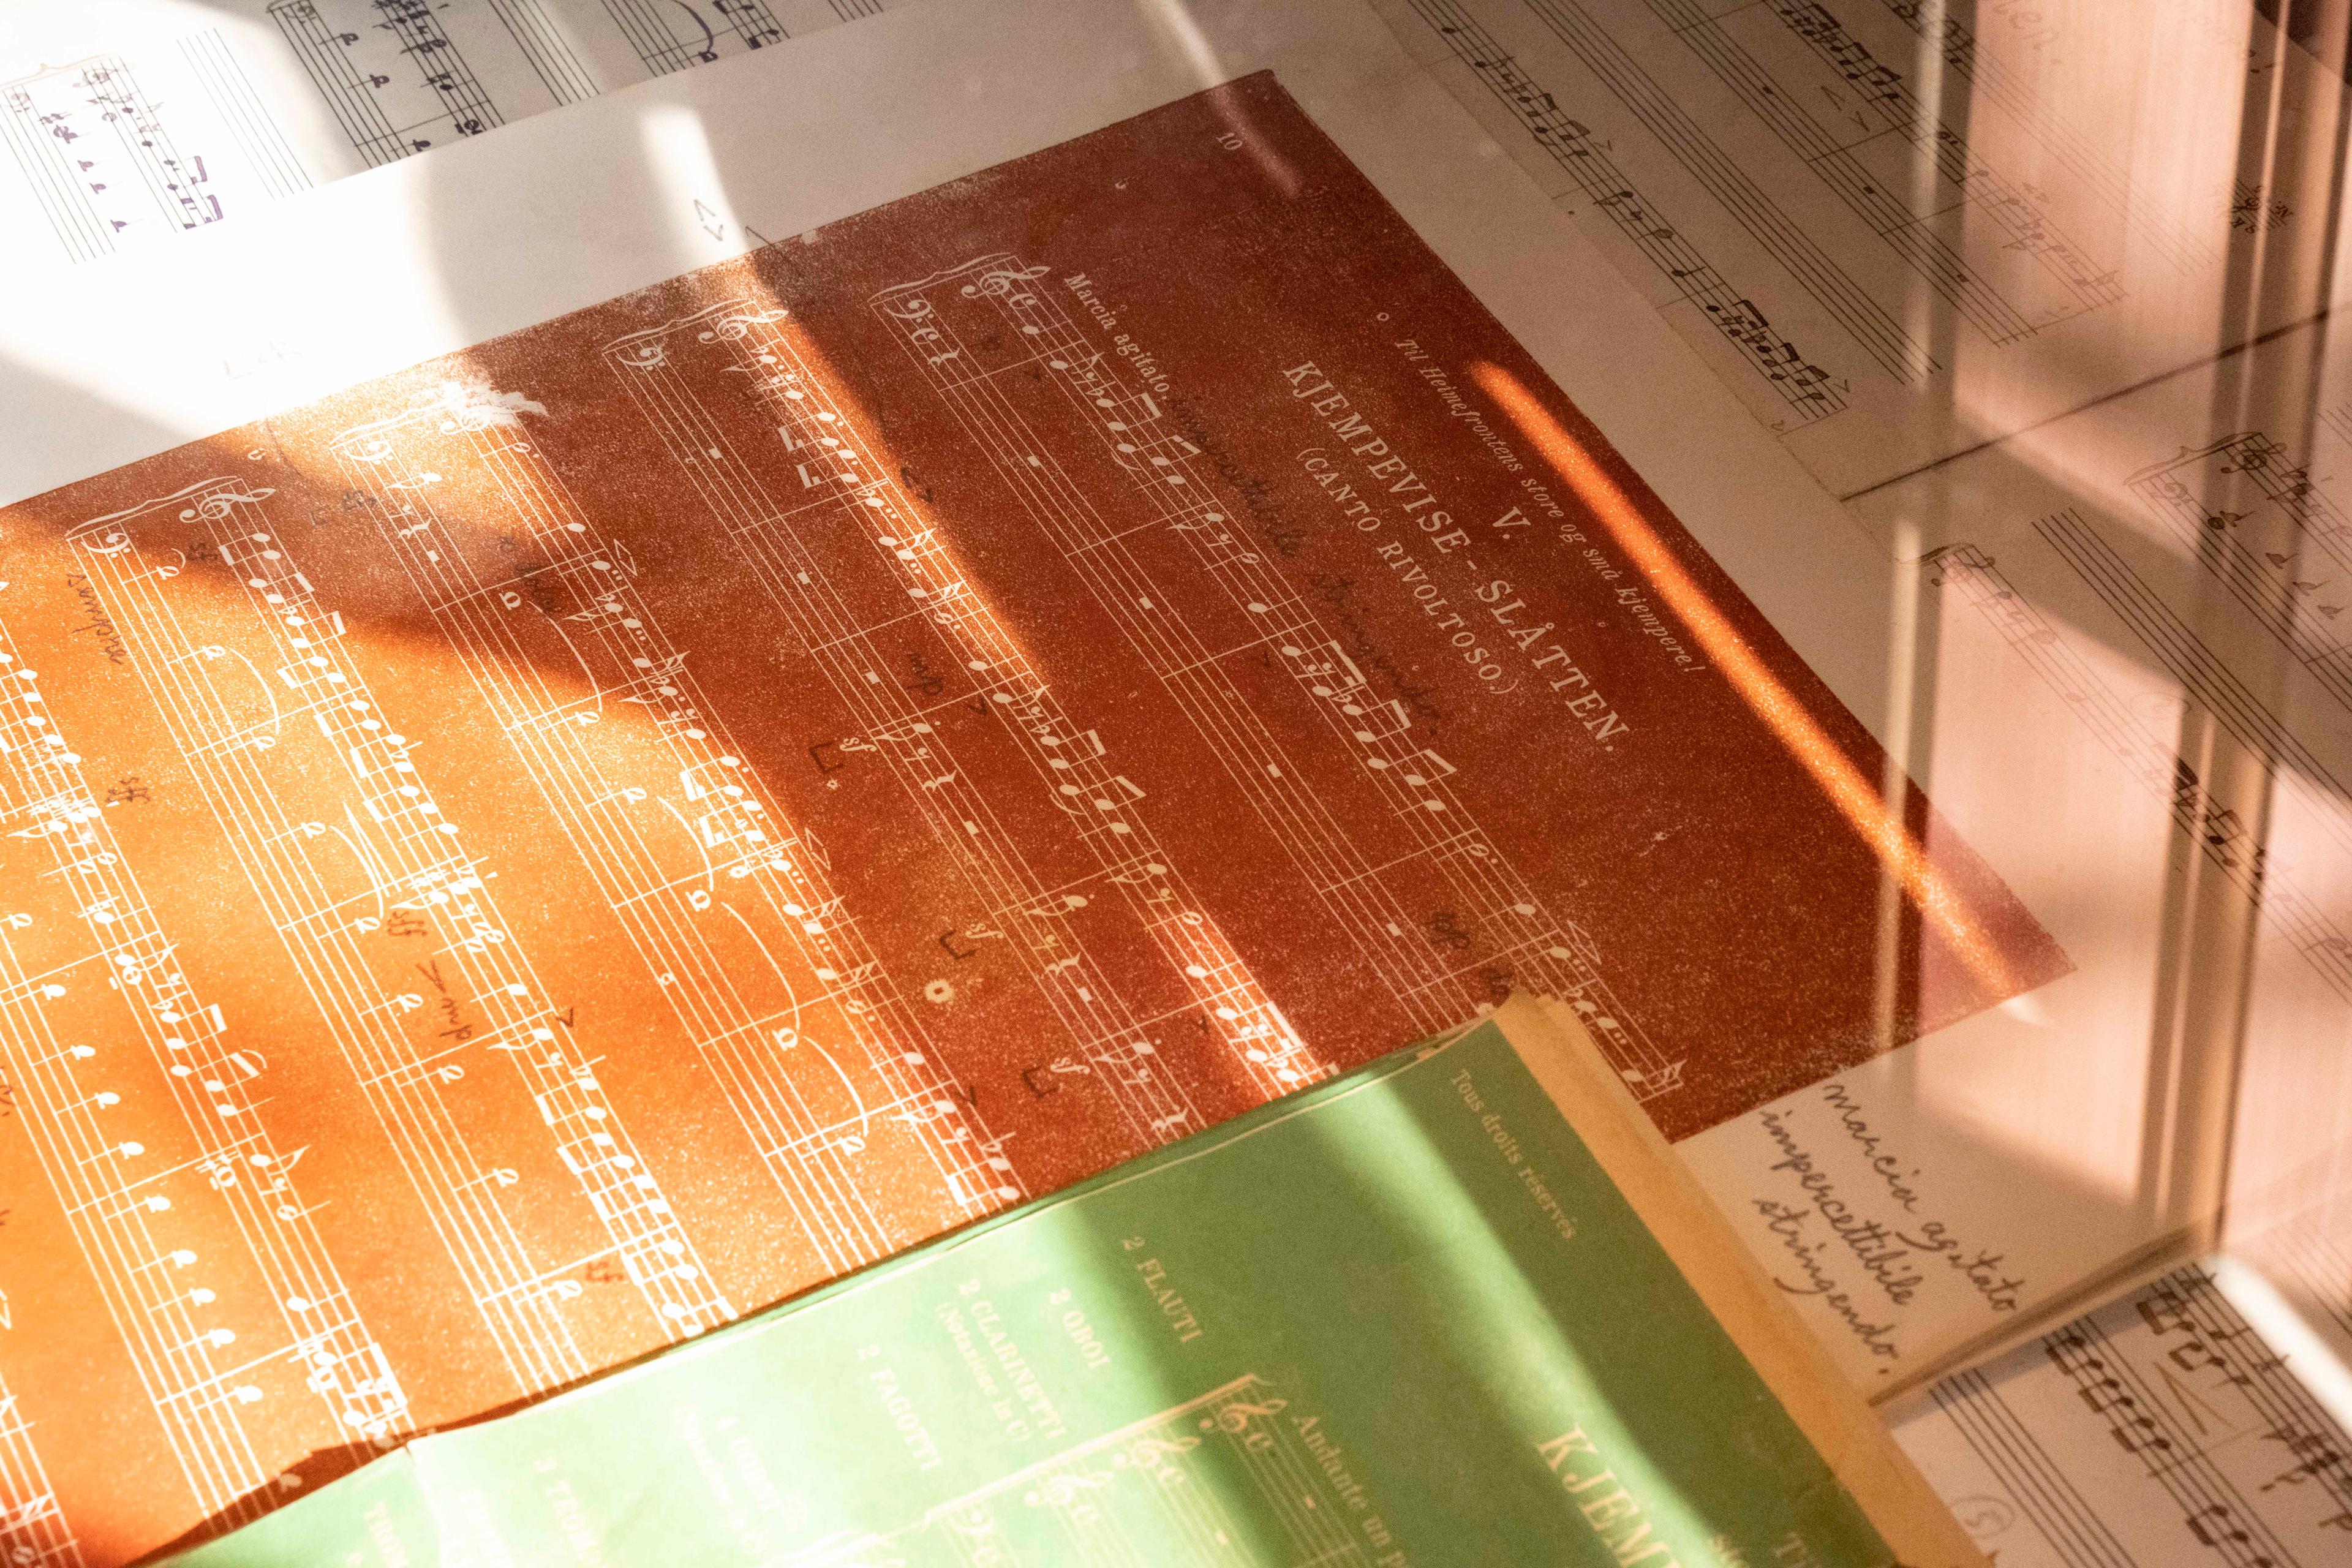 Colorful manuscripts of music pieces by Harald Sæverud are laying on a table.